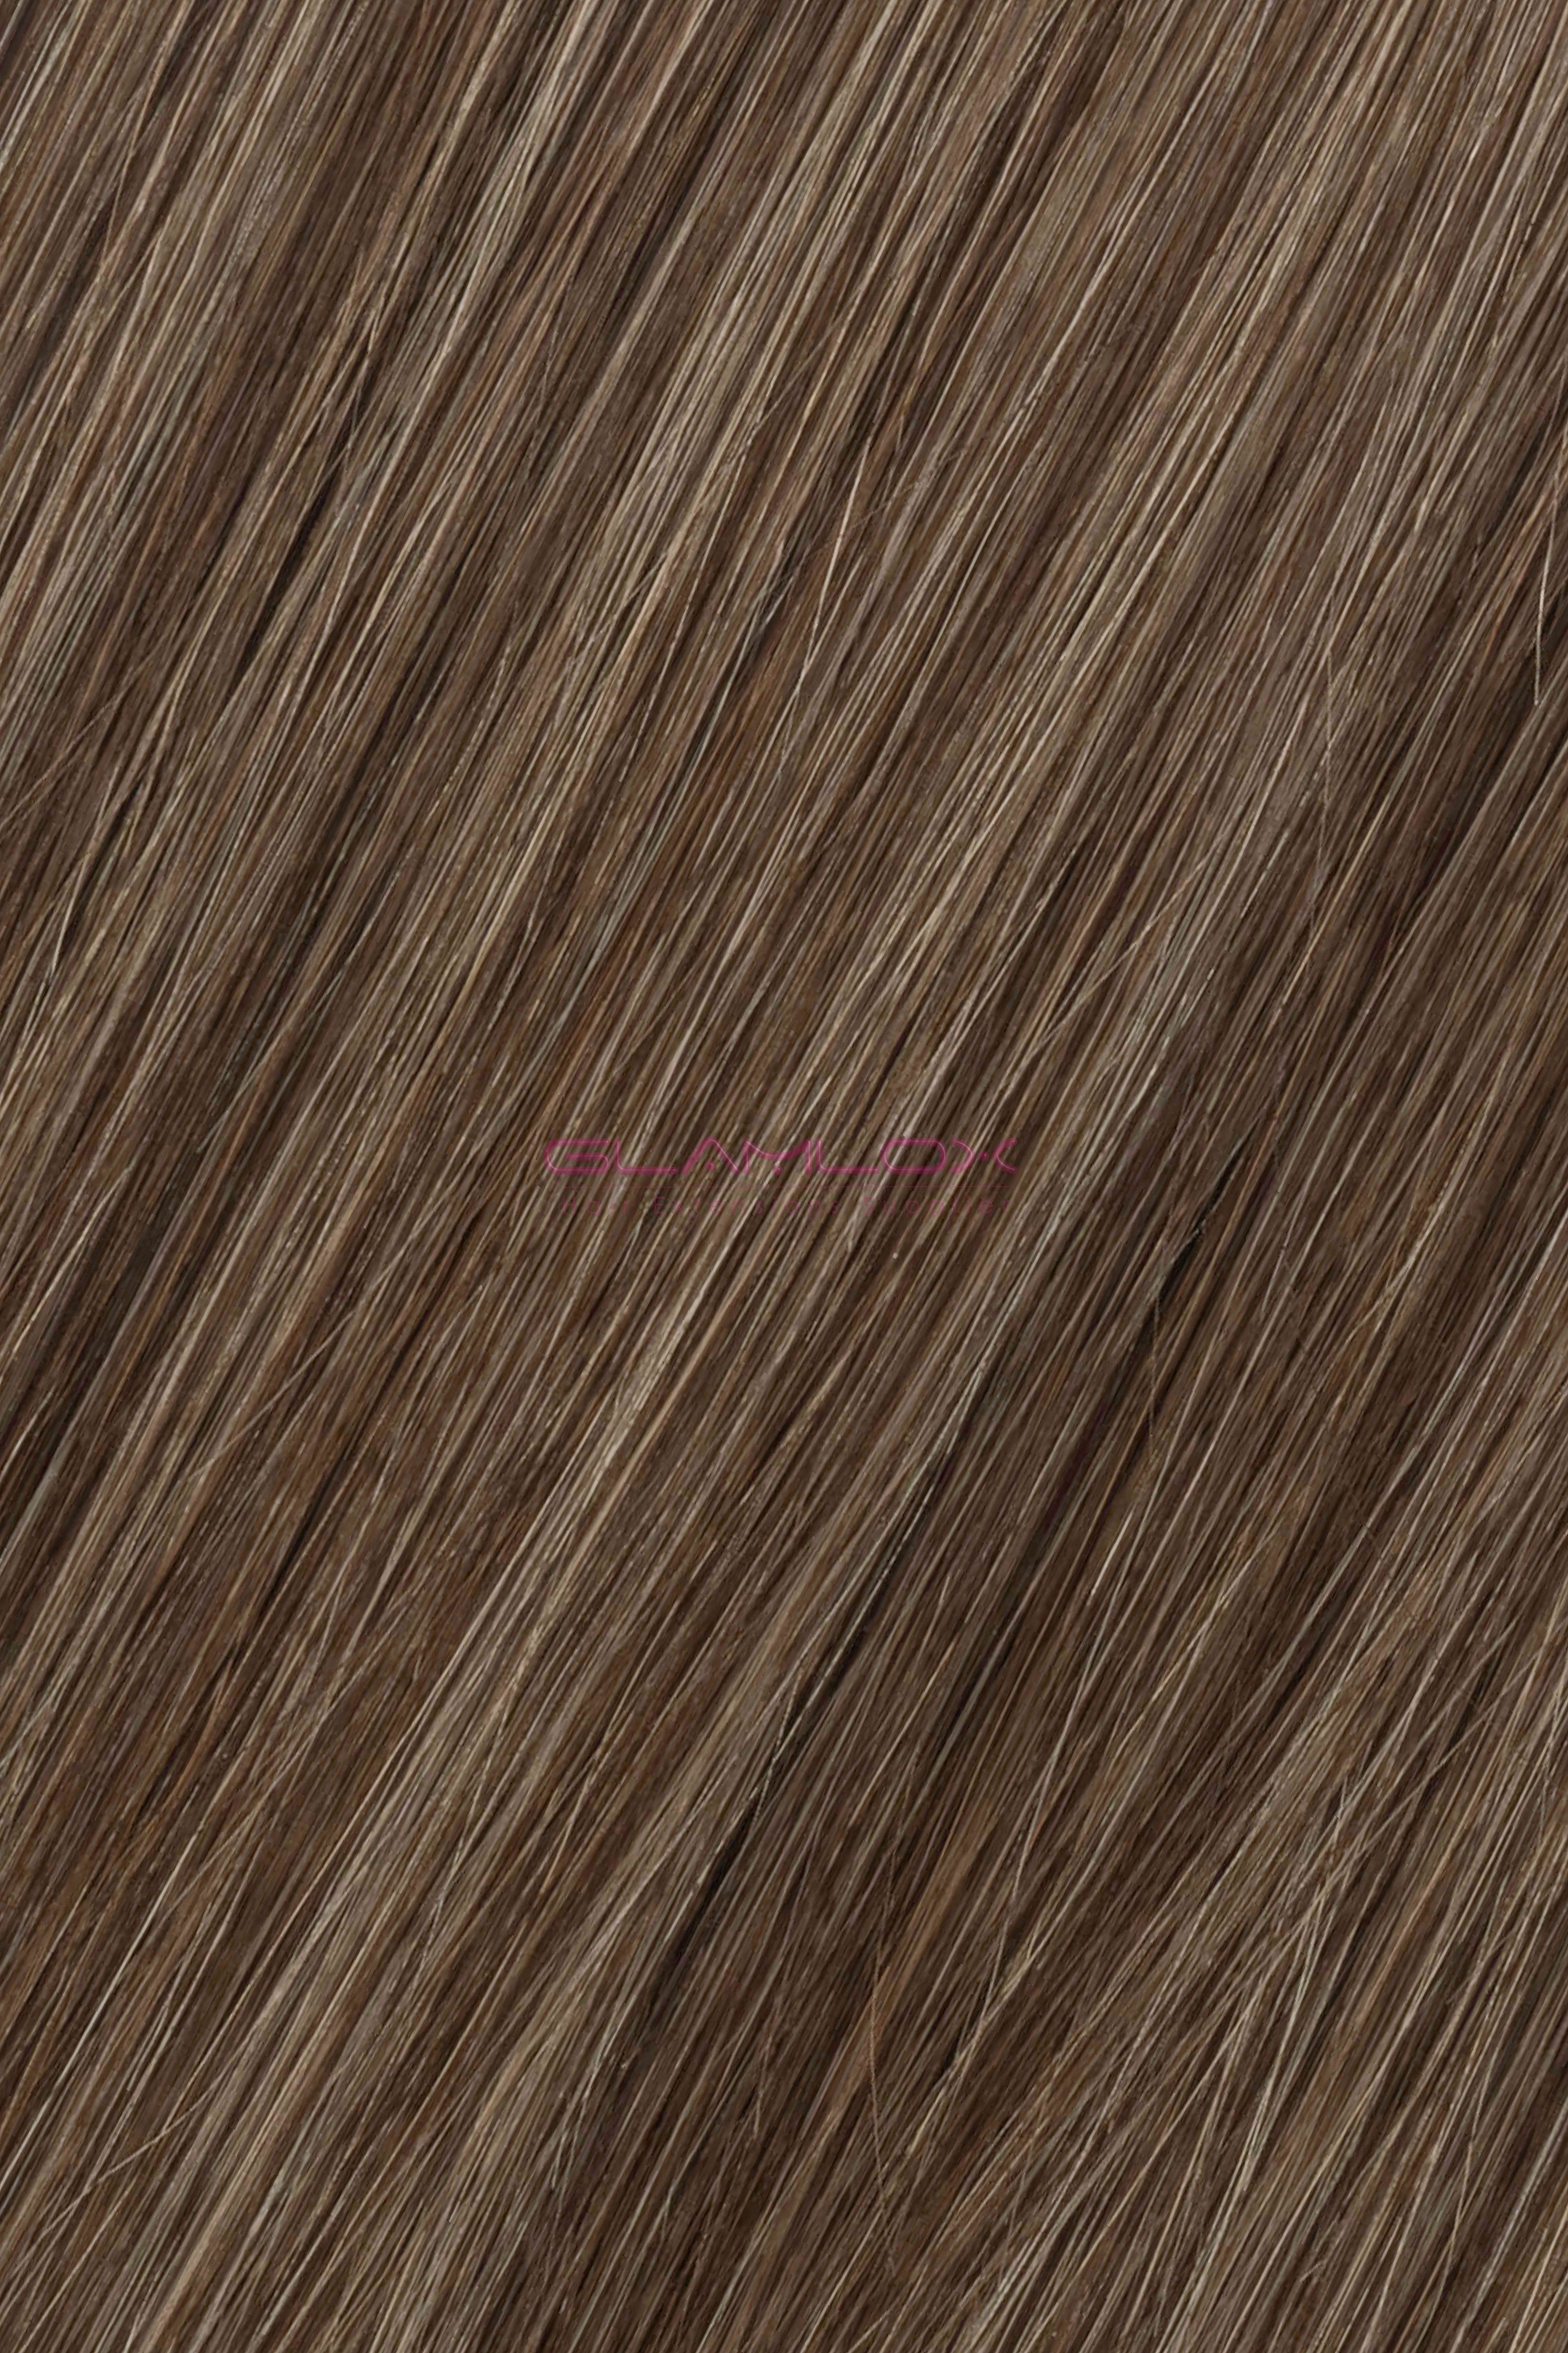 18" - 19" Half Weft Hair Extensions - Russian Mongolian Natural Ratio Remy Human Hair